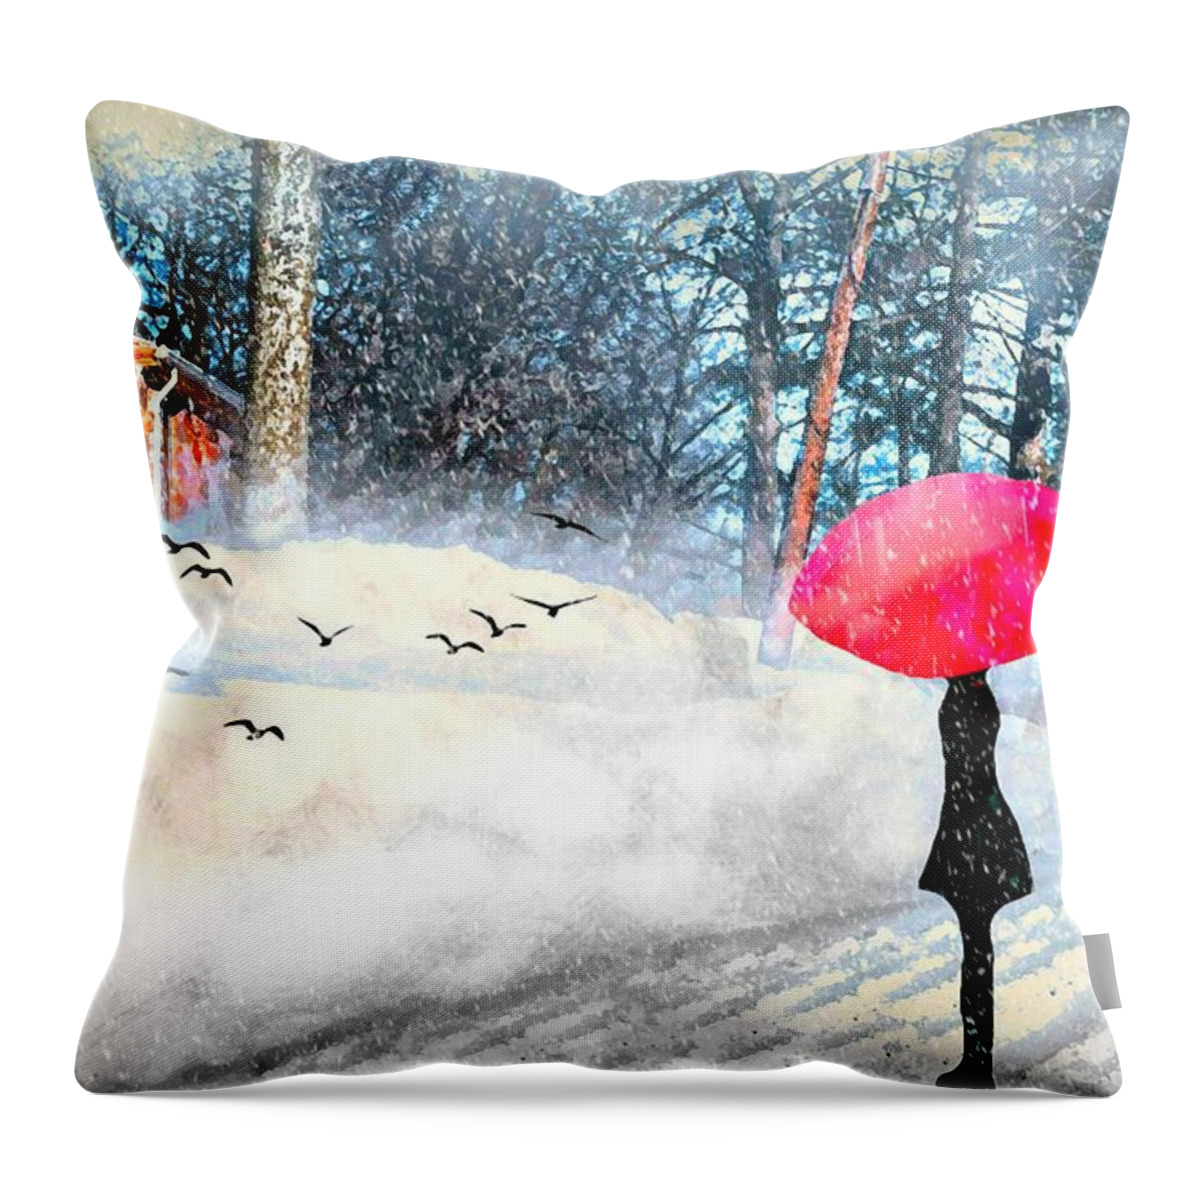 Snowy Red Umbrella Throw Pillow featuring the photograph Snowy Red Umbrella by Diana Angstadt